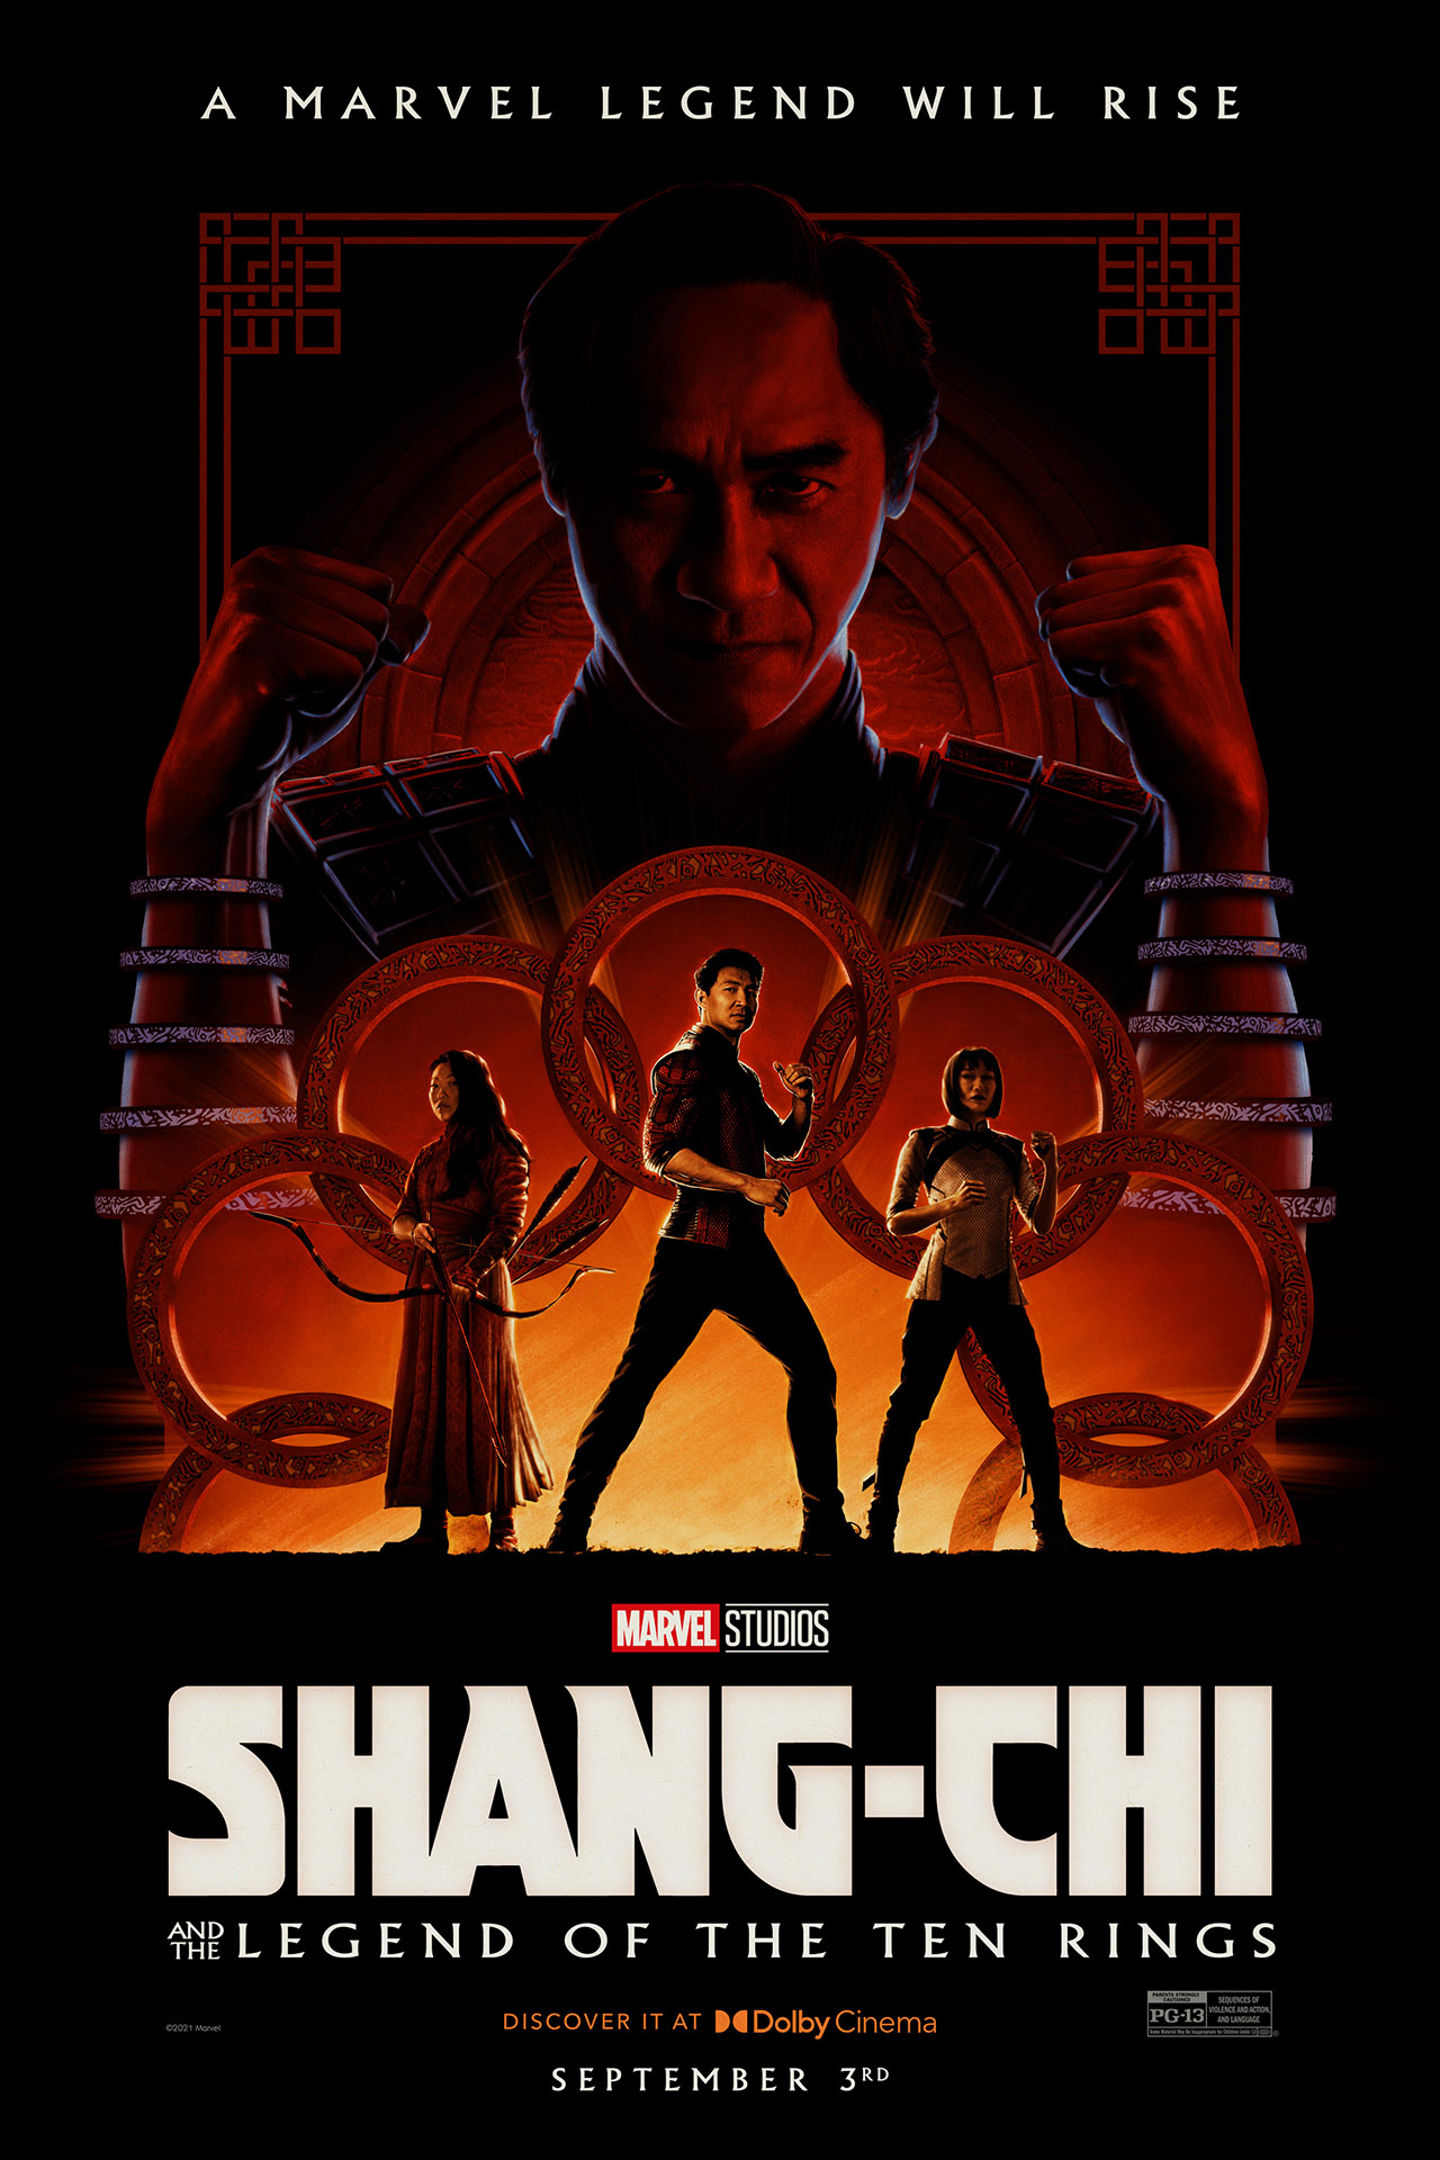 Ten rings of the legend Is Shang